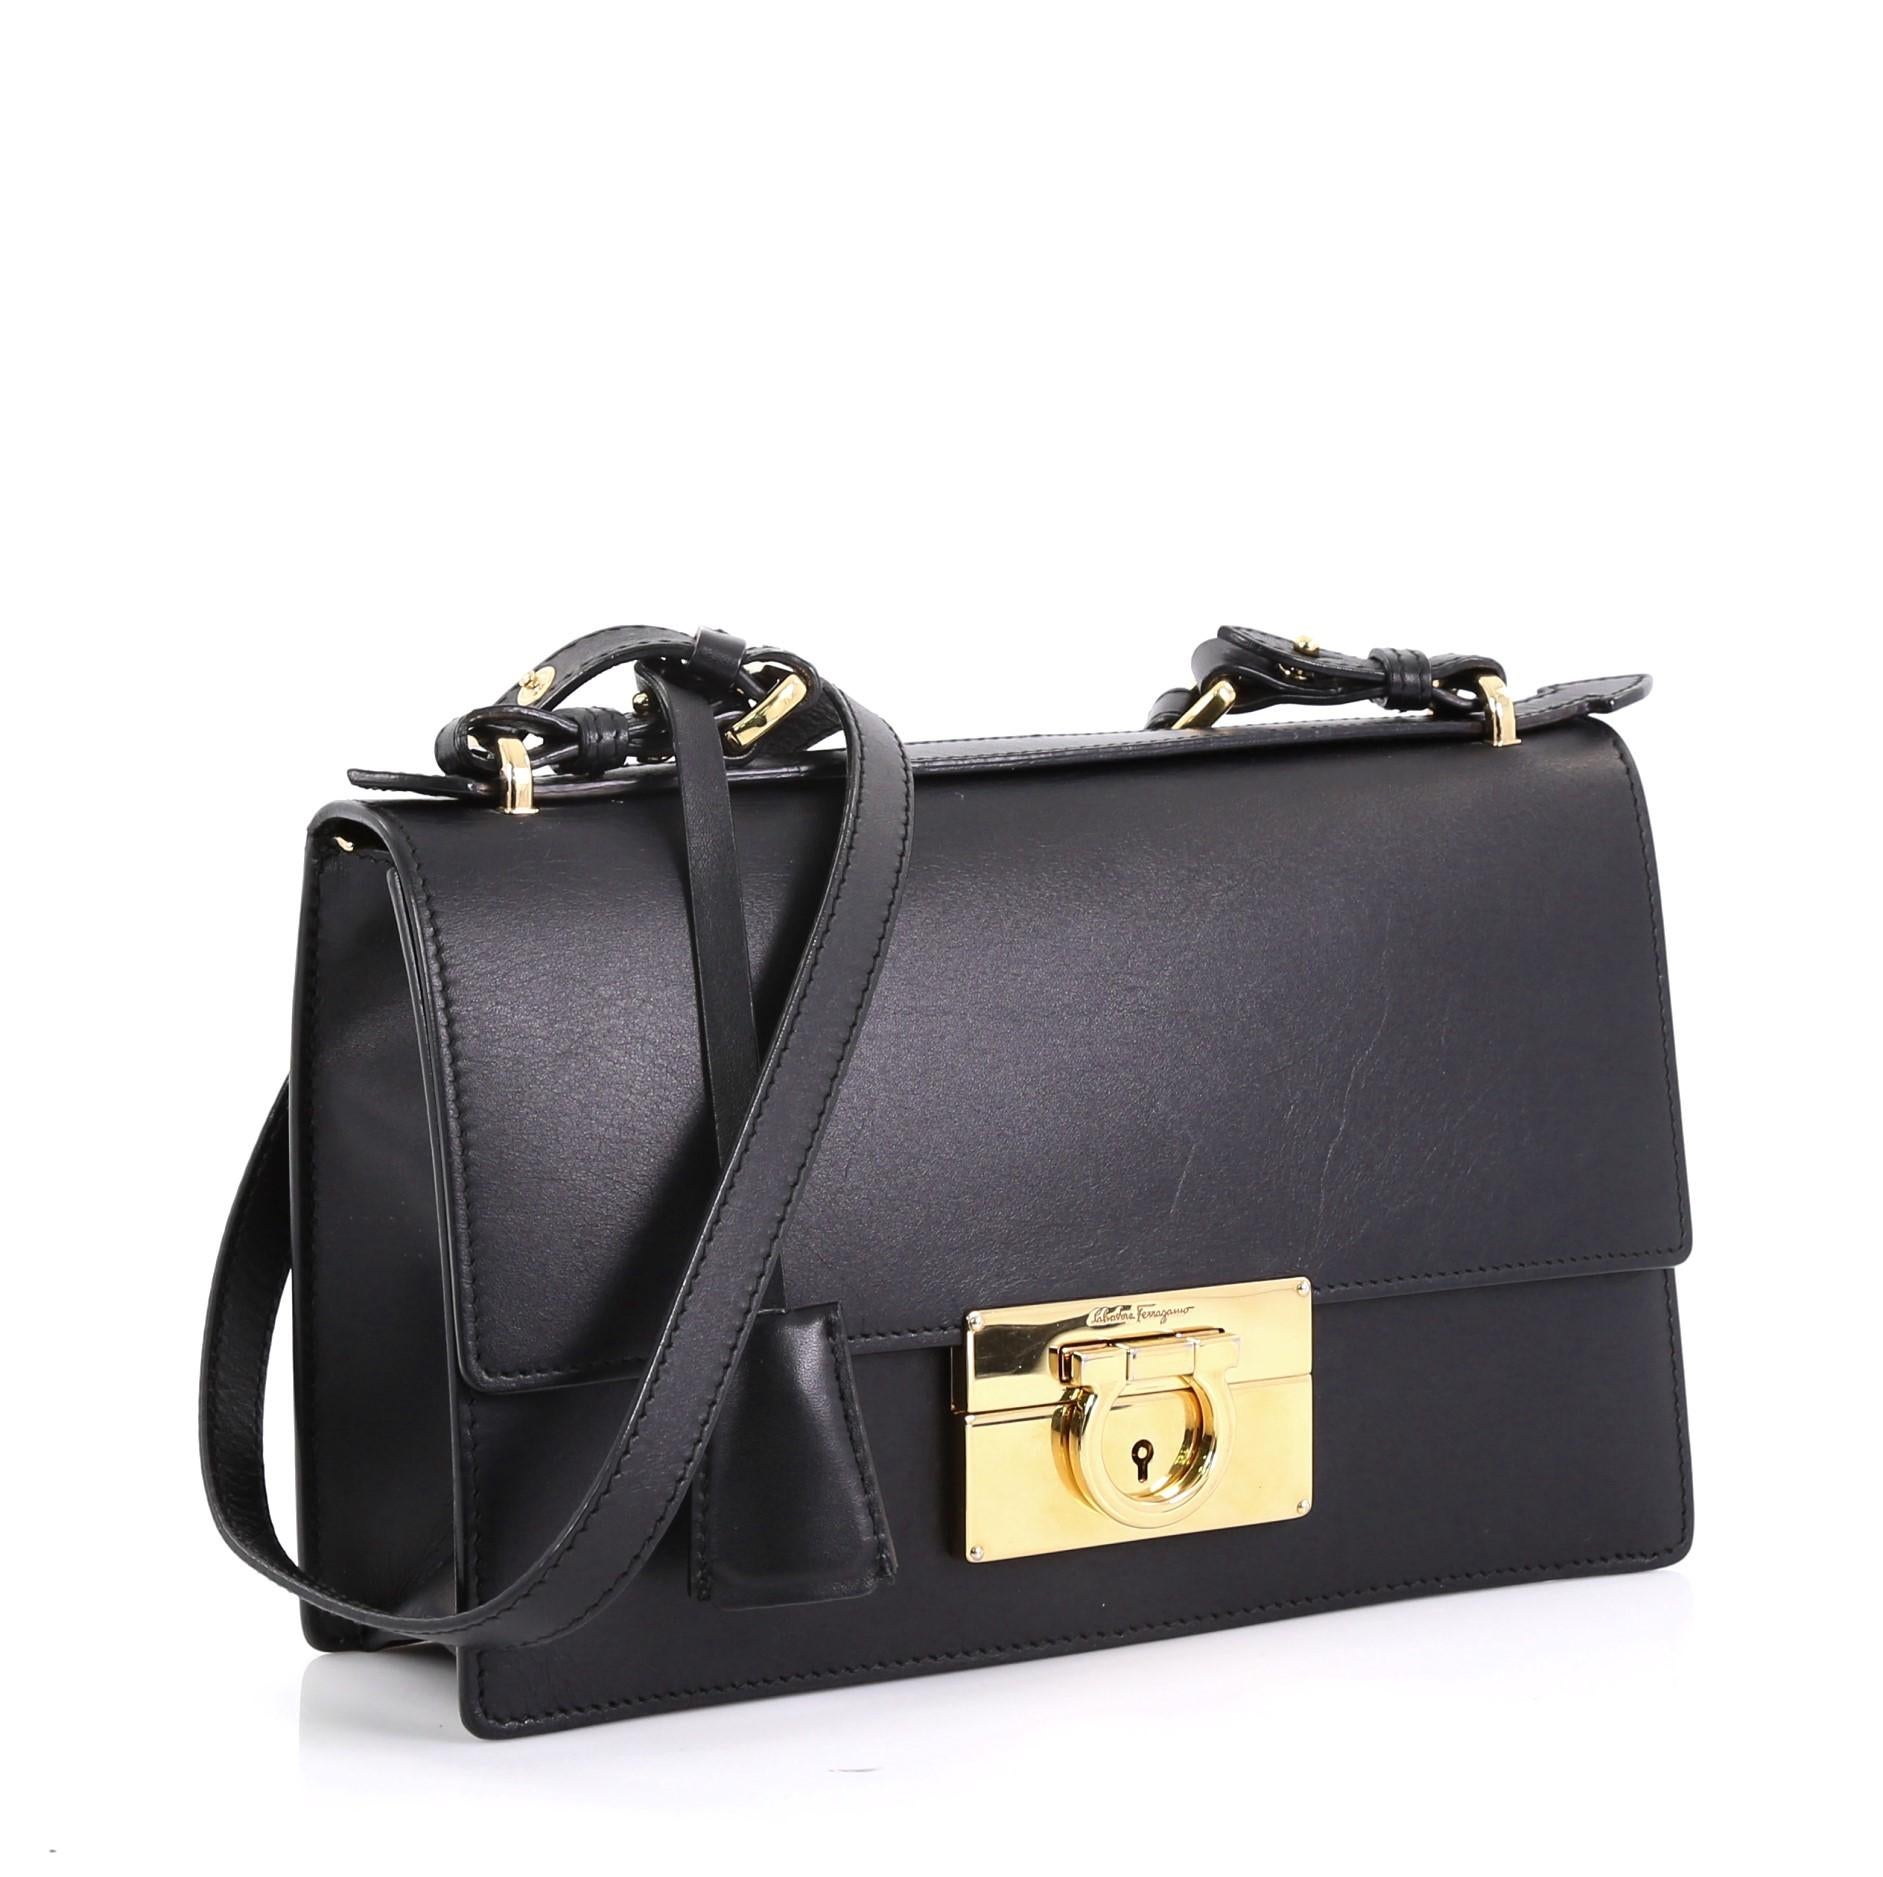 This Salvatore Ferragamo Aileen Shoulder Bag Leather Medium, crafted from black leather, features an adjustable shoulder strap and gold-tone hardware. Its clasp closure opens to a black leather interior with zip pocket. 

Estimated Retail Price: